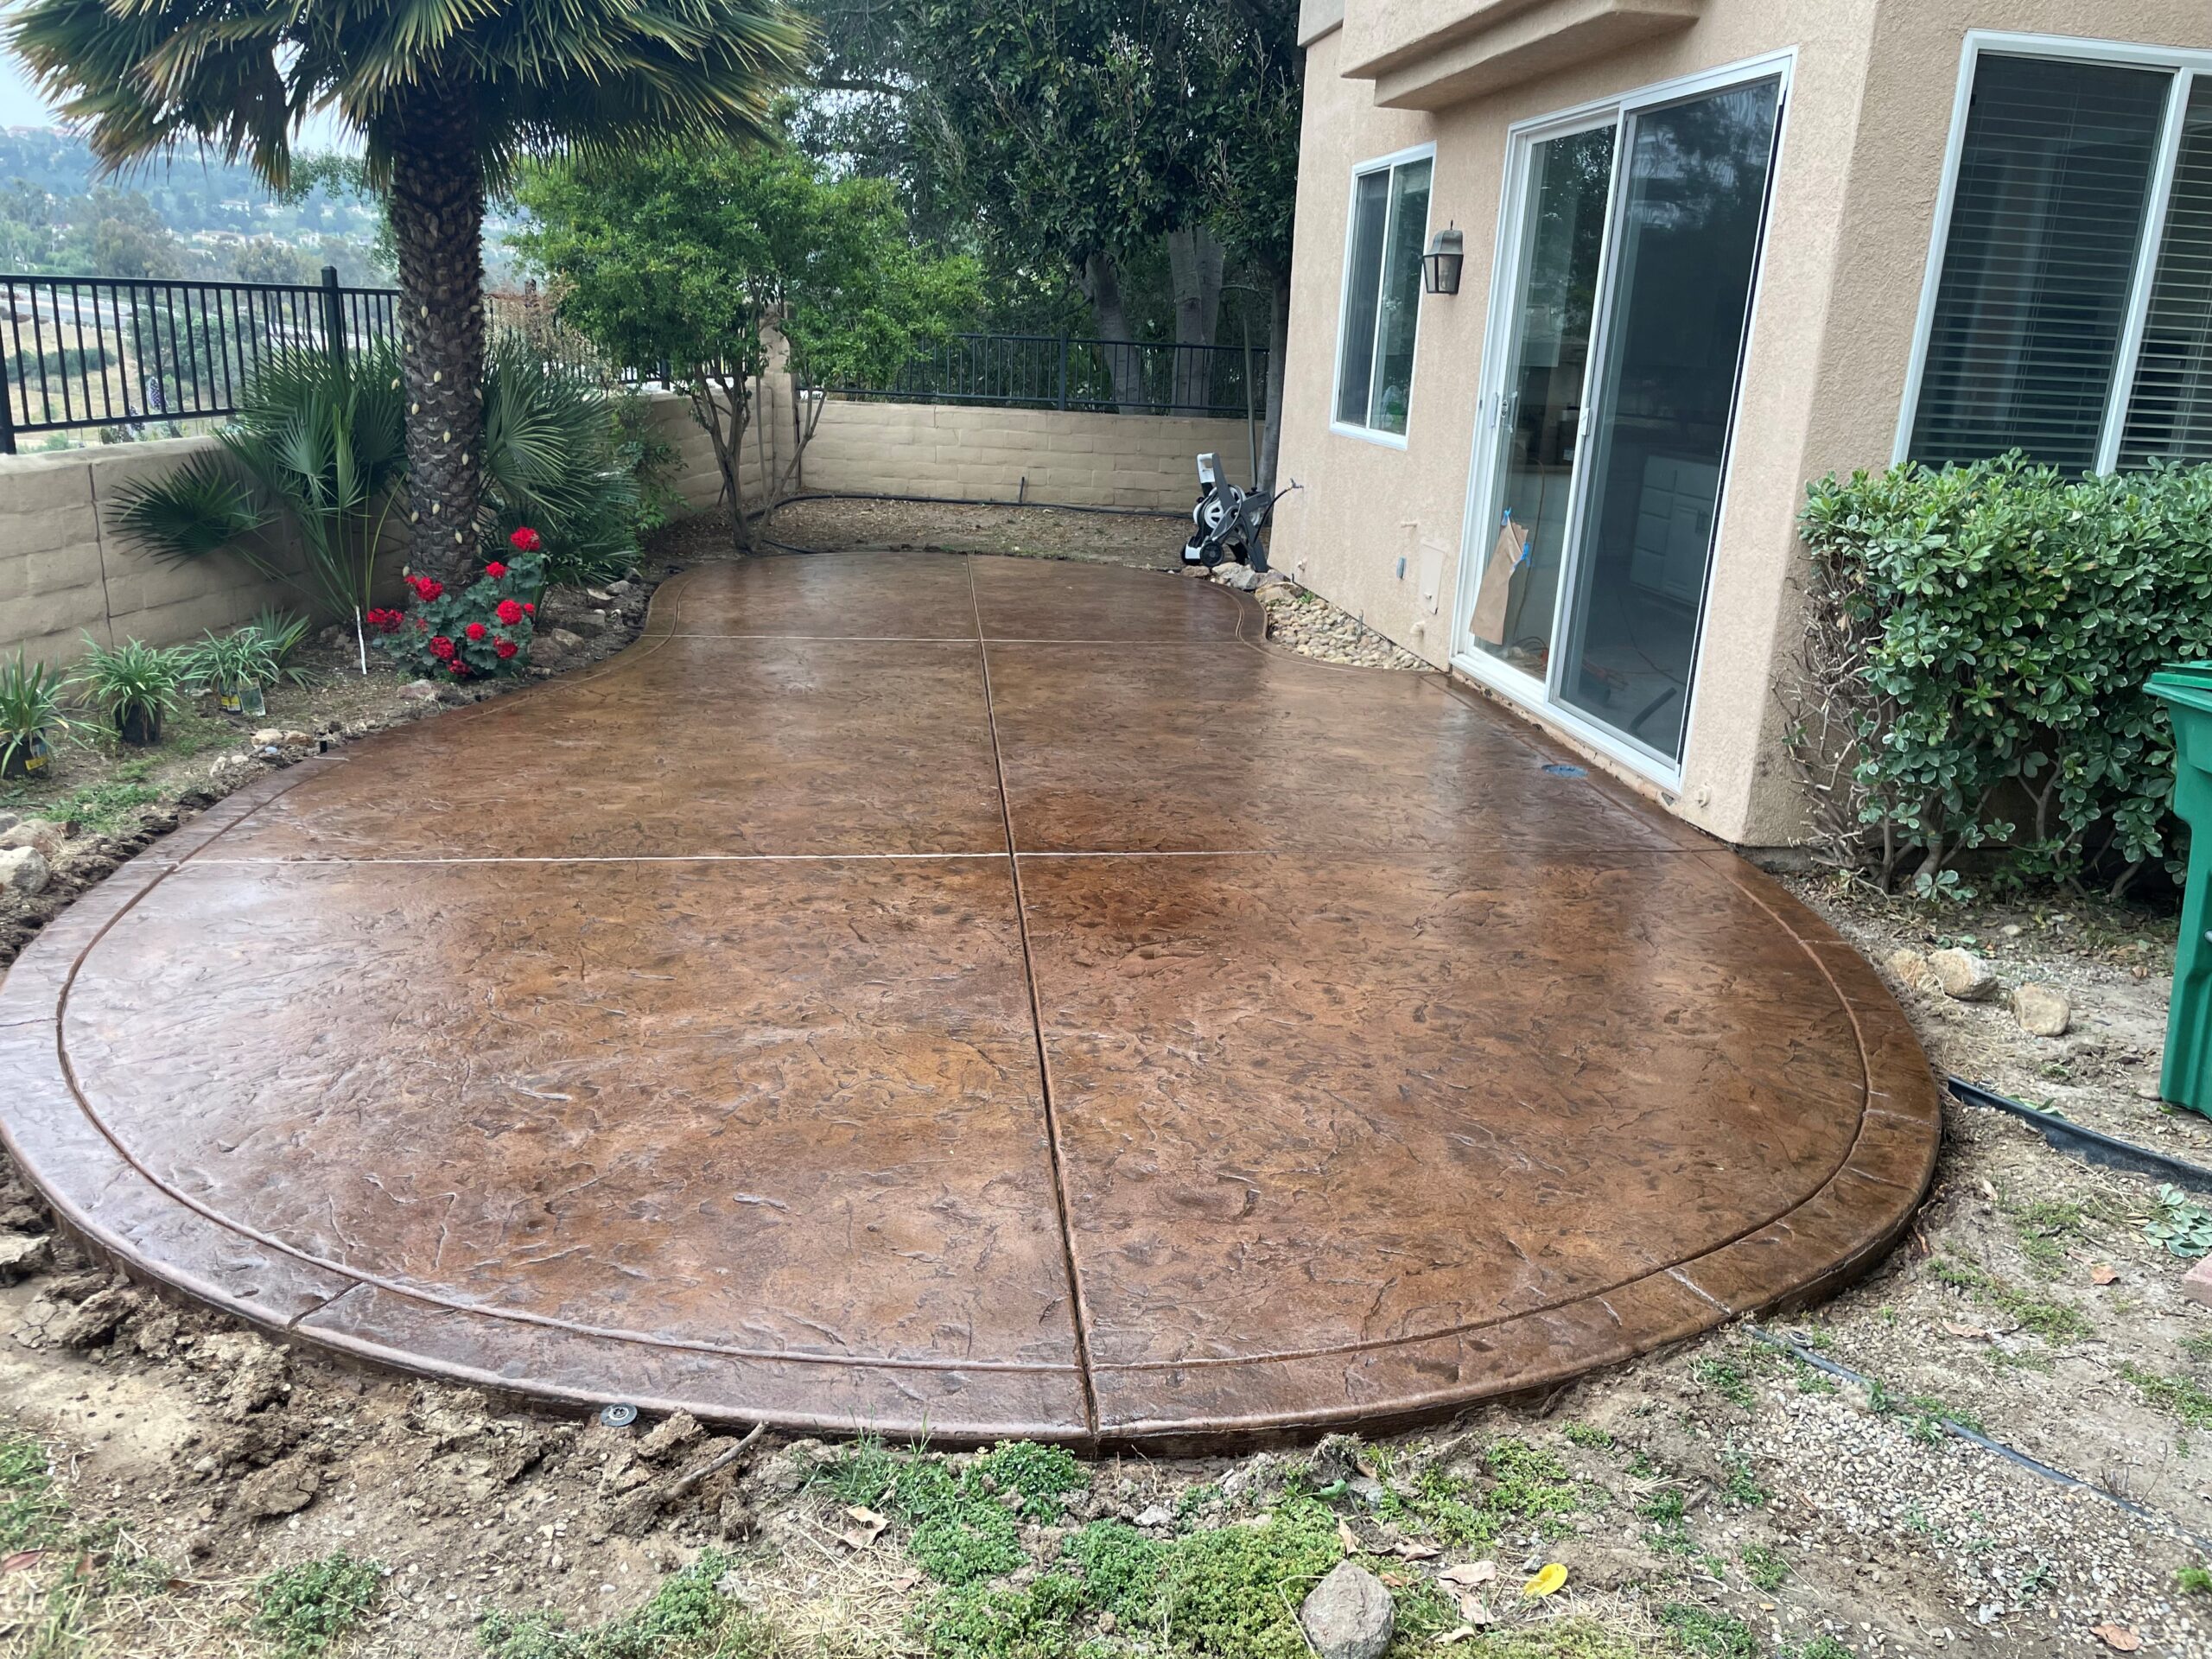 Backyard patio after sealer application, showcasing an enhanced color depth and a glossy finish